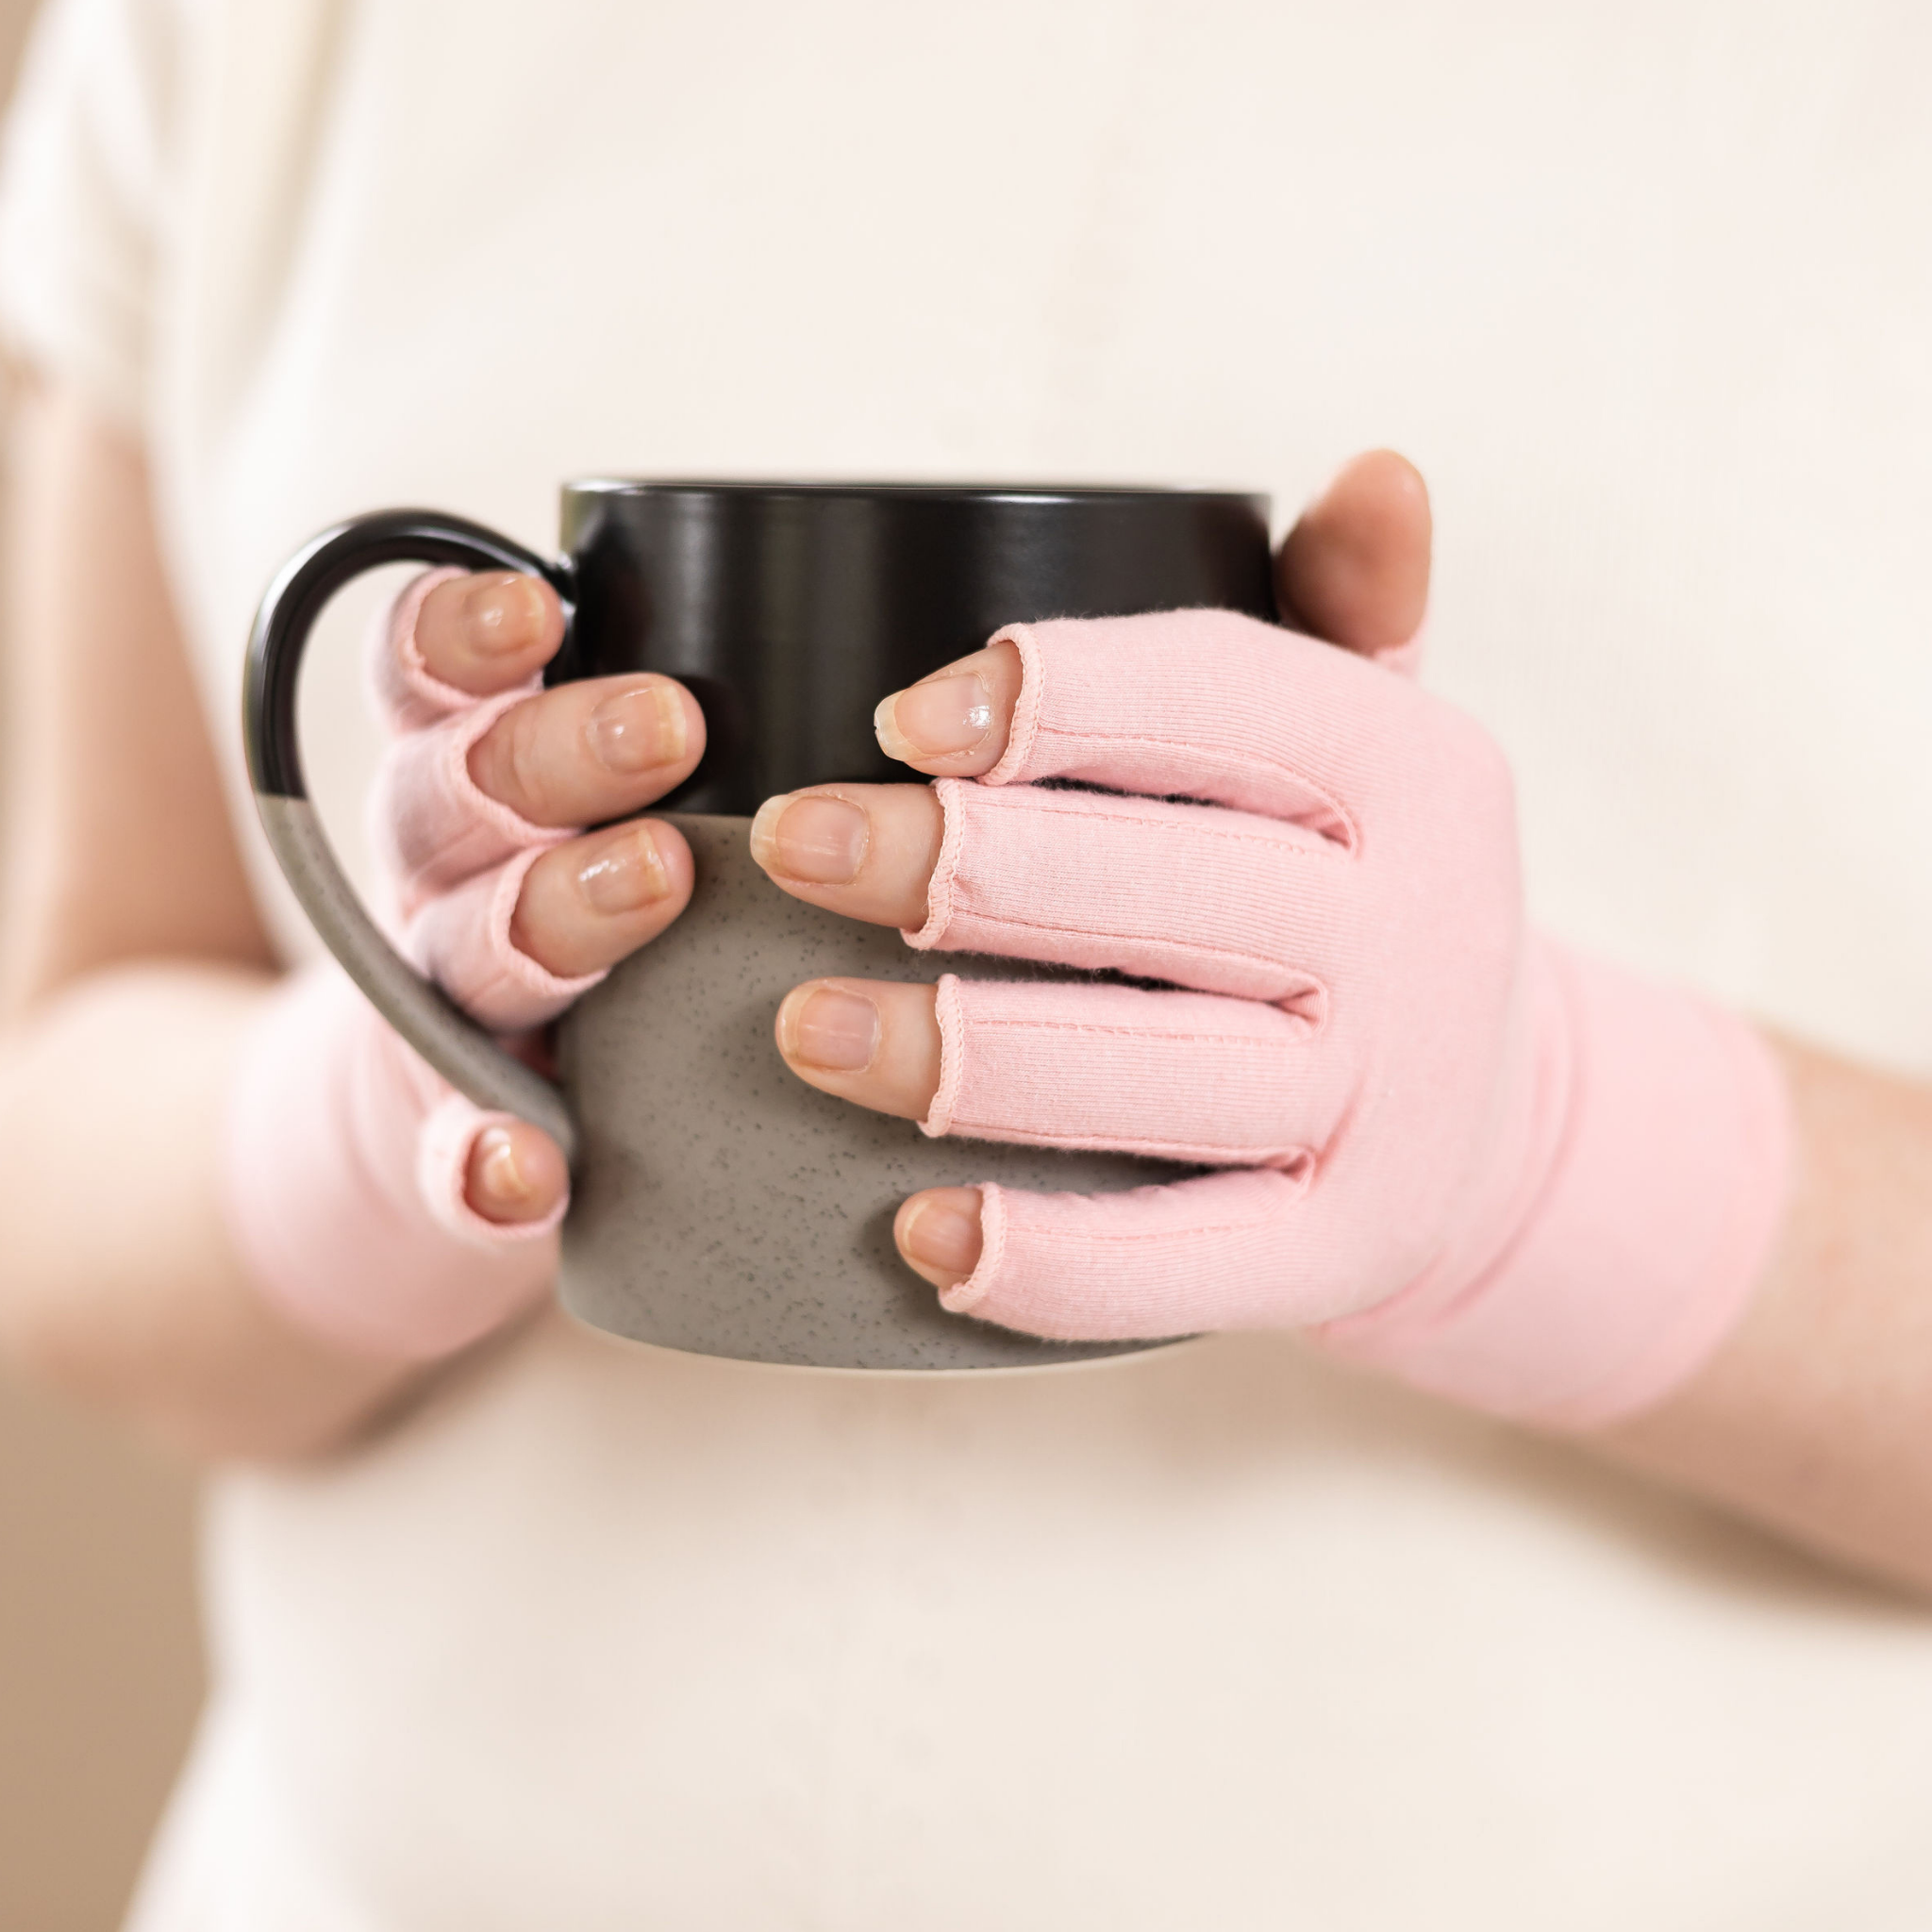 Close-up of the hands of a woman with arthritis, wearing Ballet Pink Compression Gloves, and holding a mug of turmeric tea